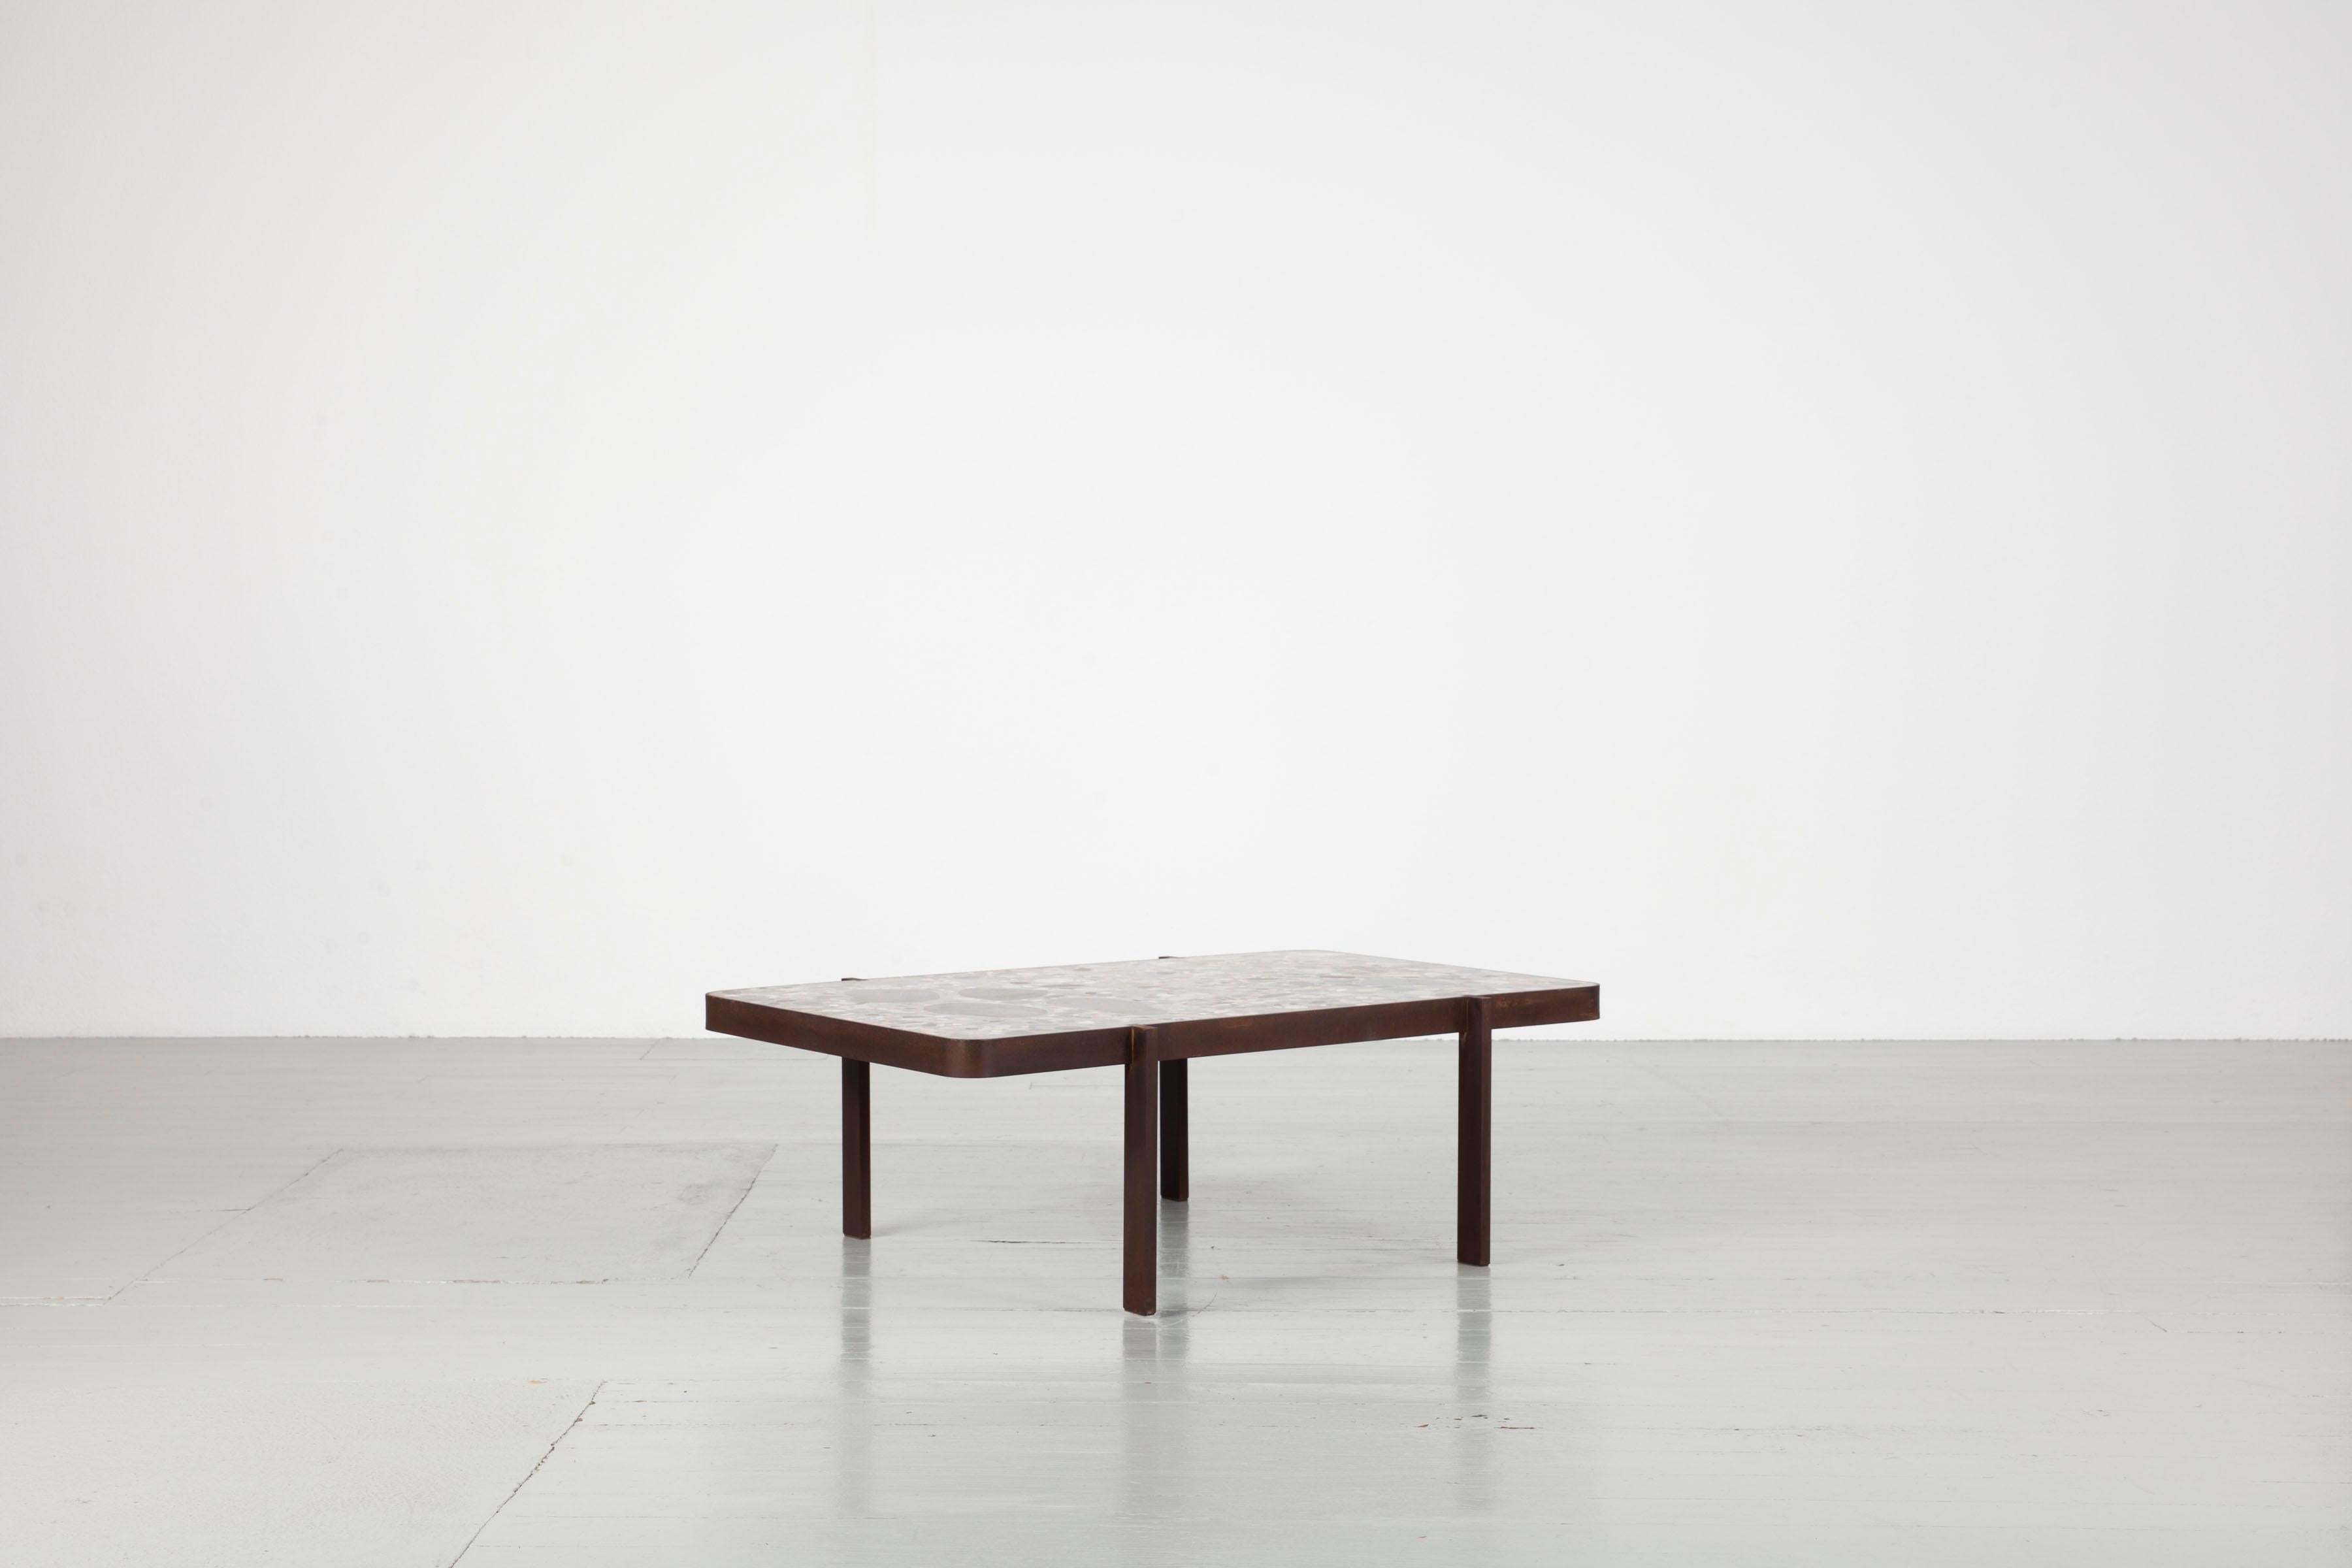 Felix Muhrhofer Contemporary Terrazzo Table with Corroded Steel Construction 3